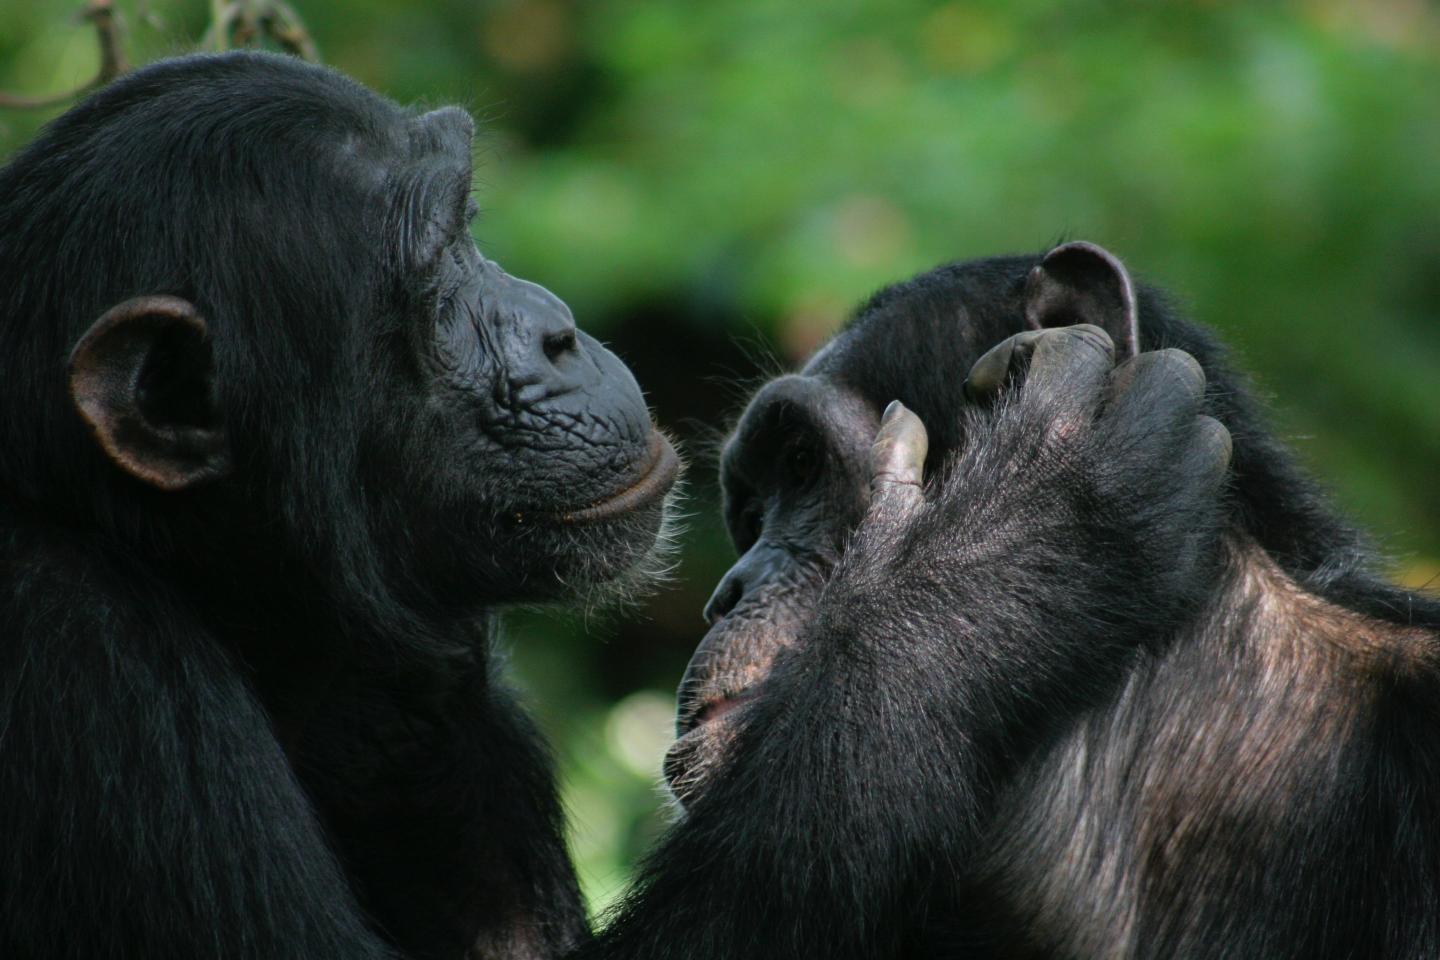 Bonobo and Chimpanzee Gestures Share Many Meanings